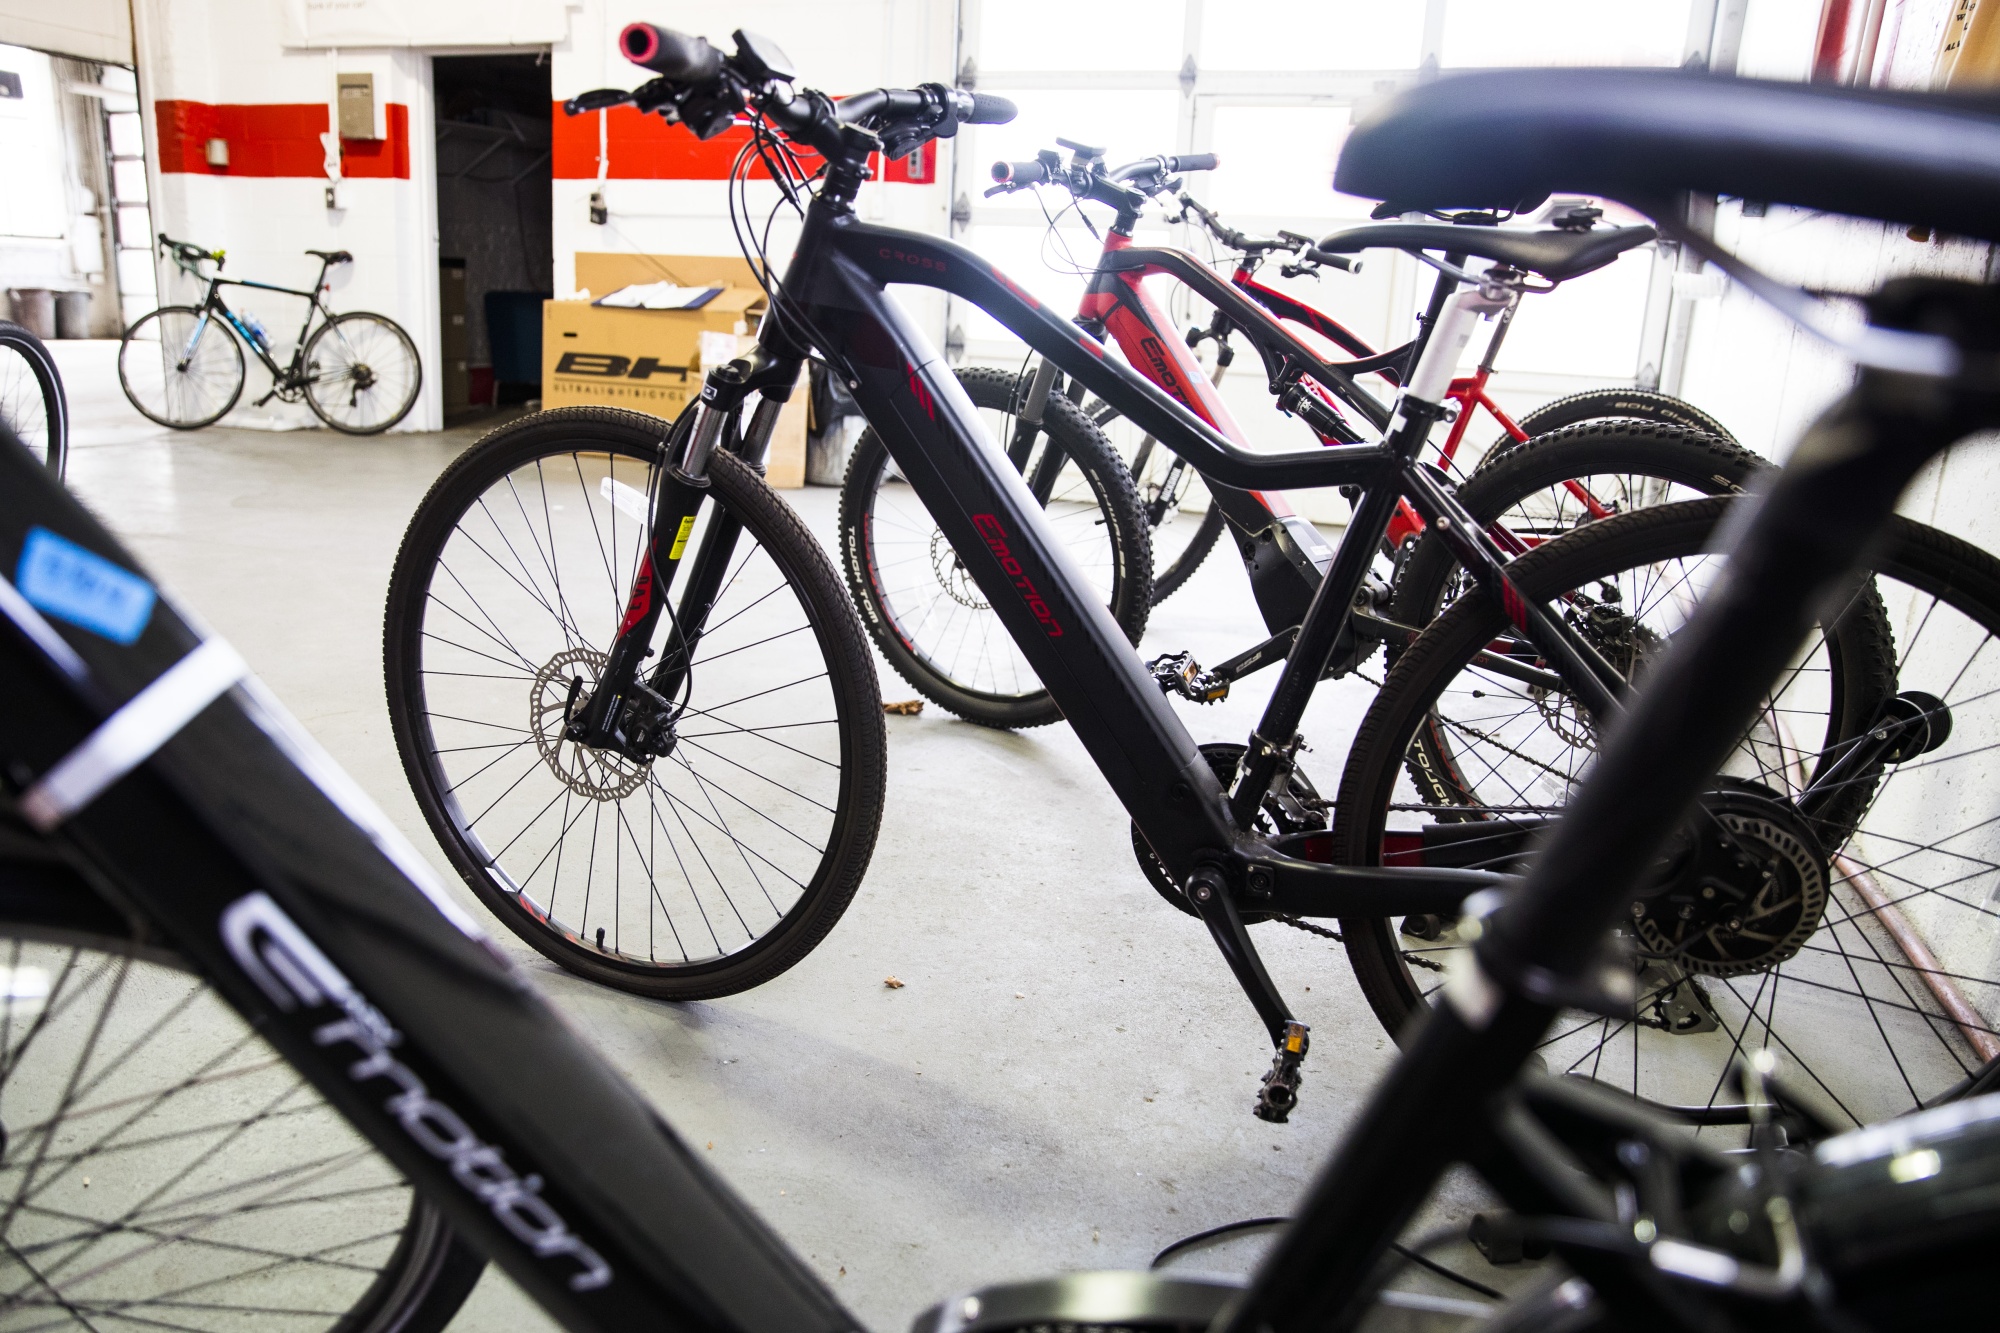 House calls for bikes: Mobile cycle shop stayed in high gear amid